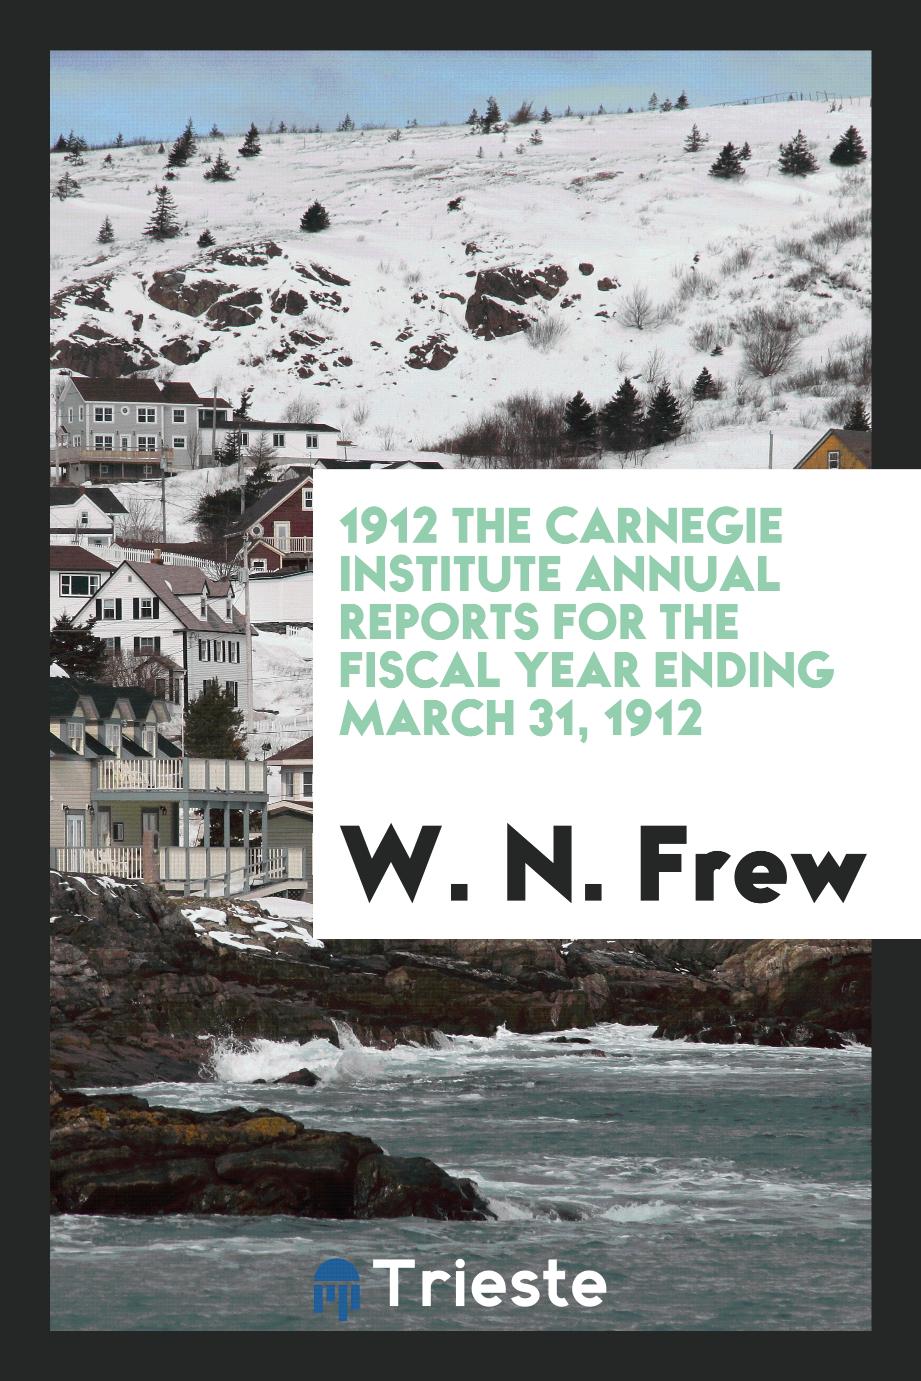 1912 The Carnegie Institute Annual Reports for the Fiscal Year Ending March 31, 1912